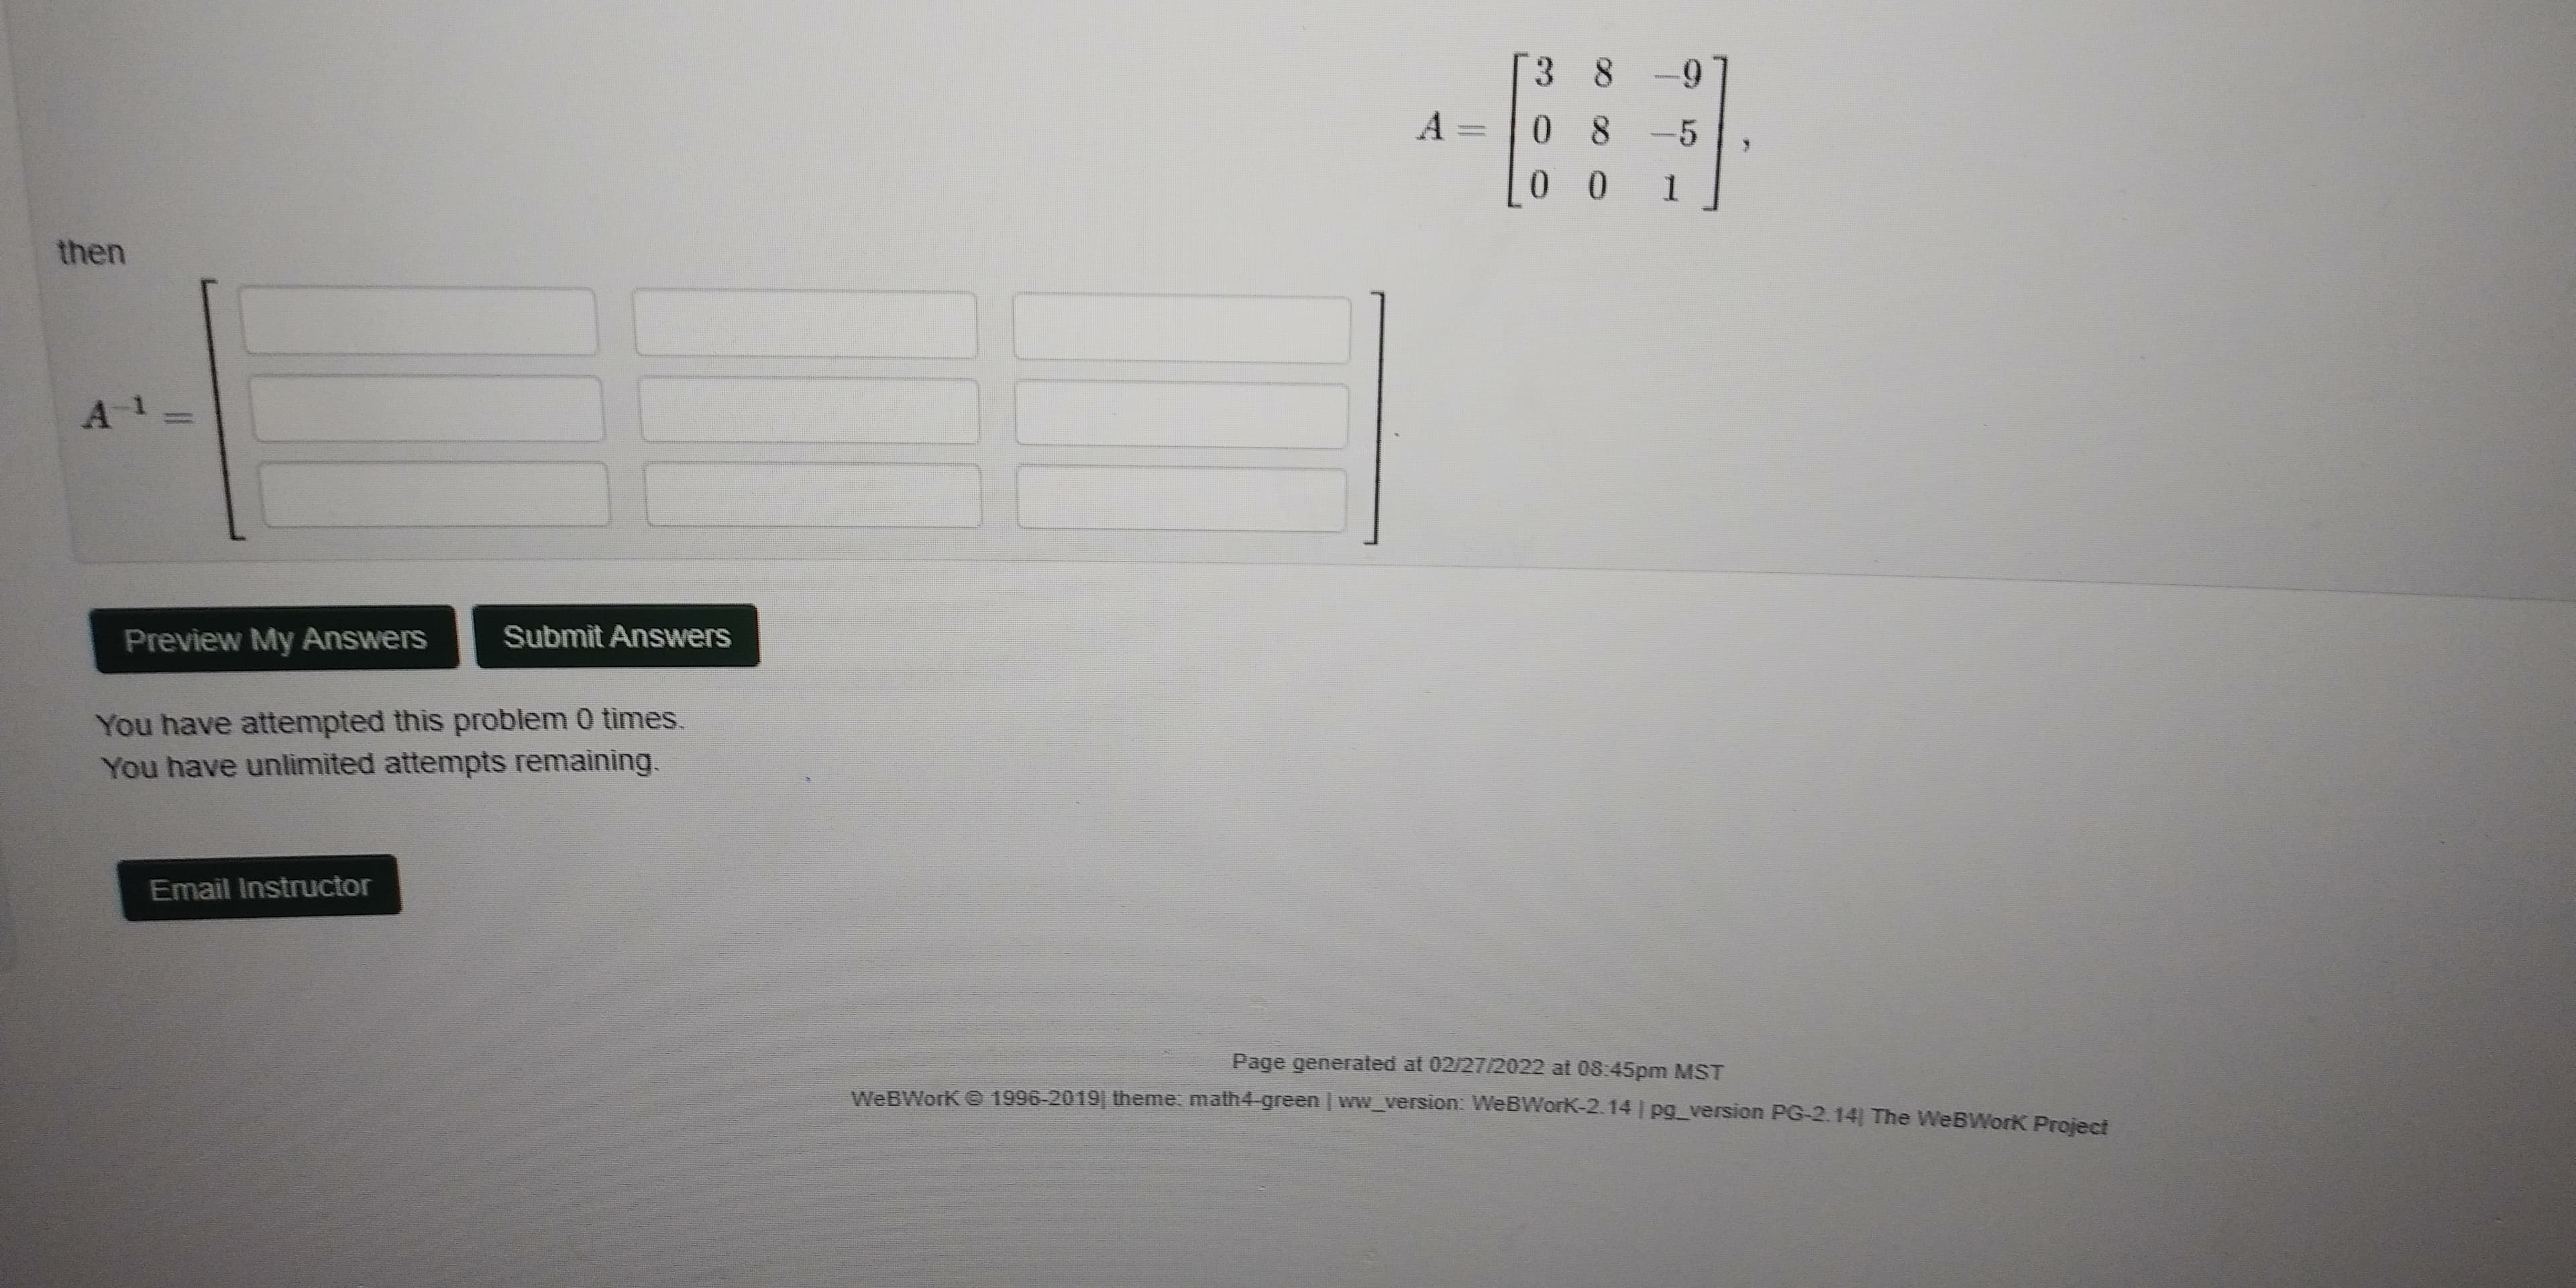 -5
I 0 0
1.
then
Preview My Answers
Submit Answers
You have attempted this problem 0 times.
You have unlimited attempts remaining.
Email Instructor
Page generated at 02/27/2022 at 08:45pm MST
WeRWork @ 1996-2019 theme: math4 green | ww_version: WeBWorK-2.14 | pg_version PG-2.14 The WeBWork Project
